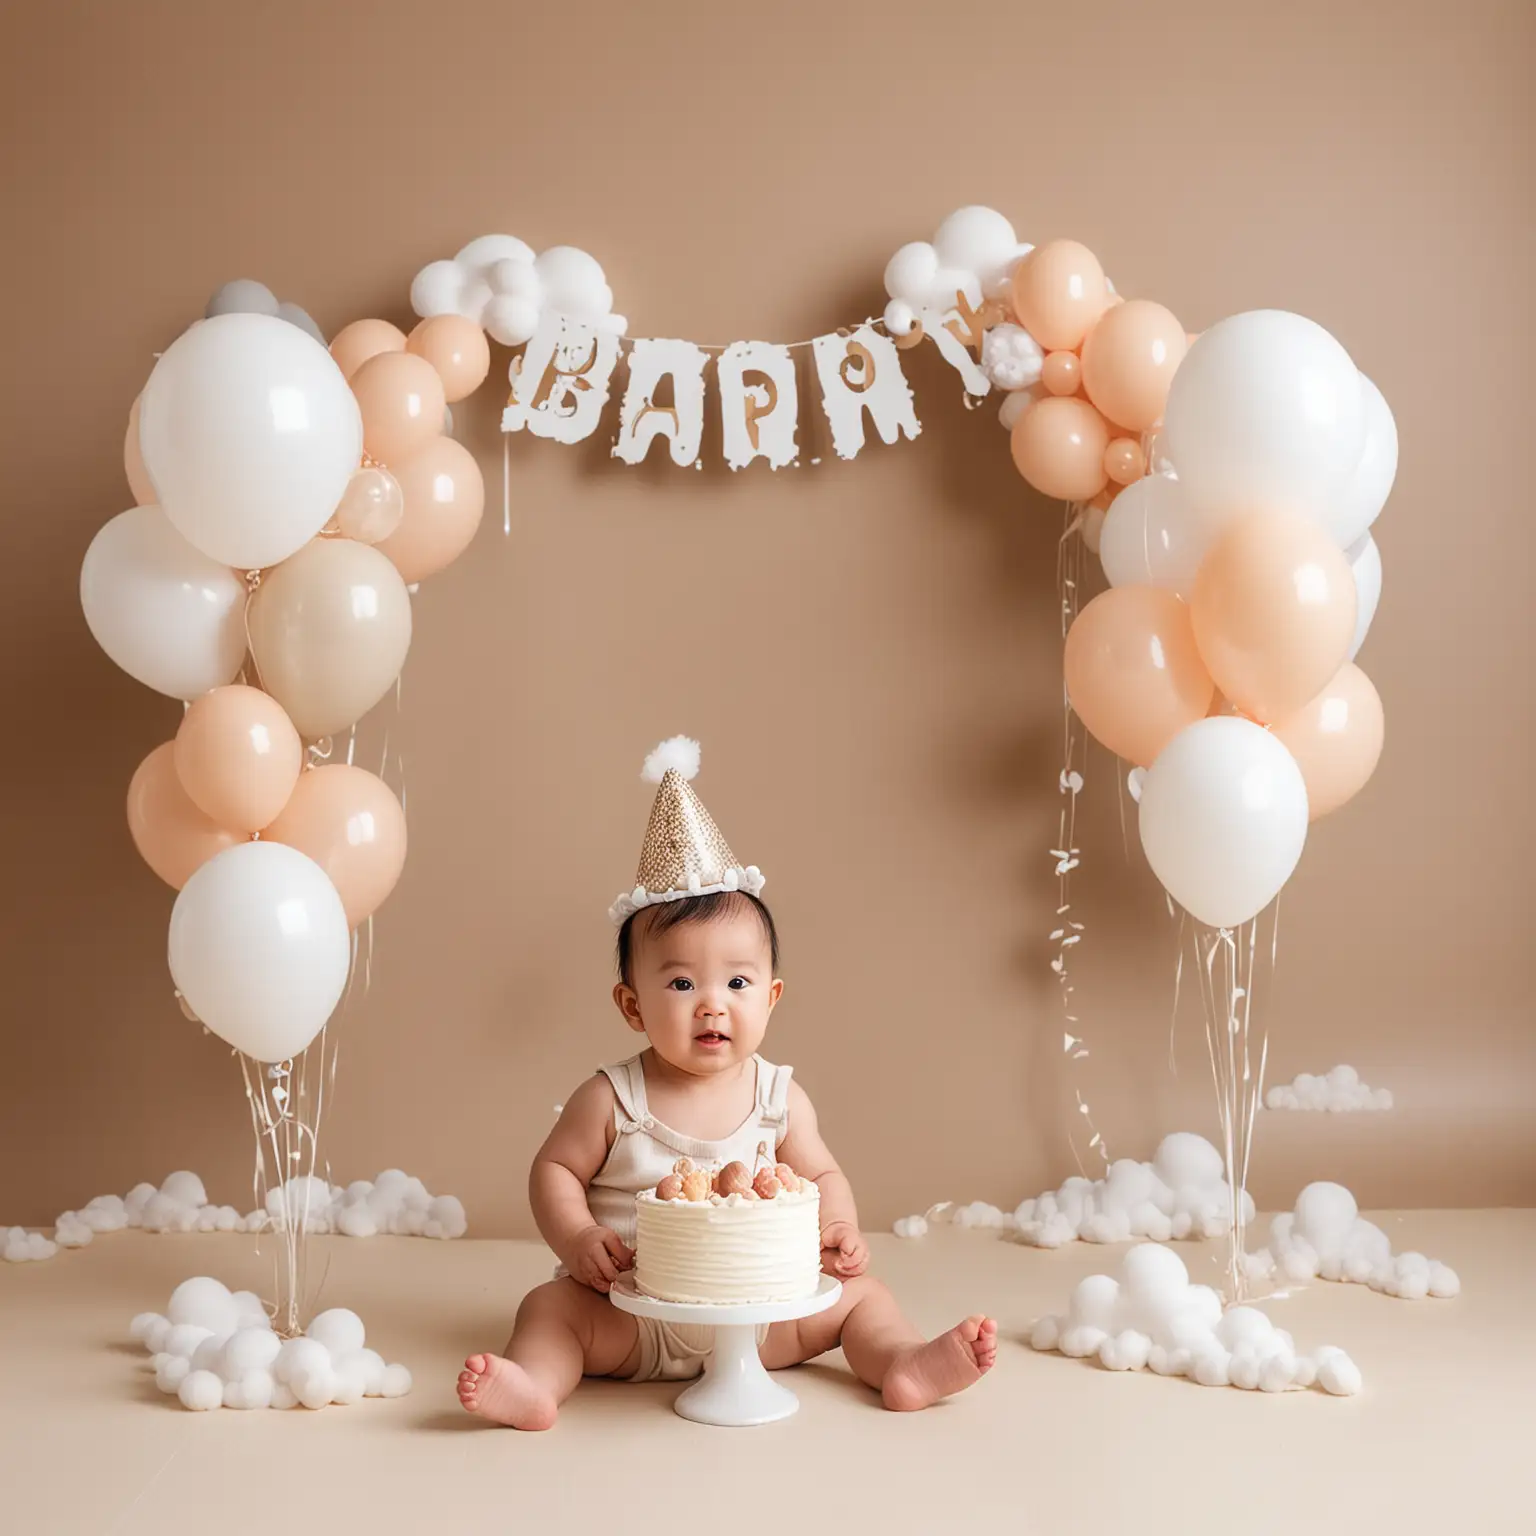 one year old birthday white cake smash photography asian baby with cute clothes simple setups balloon garland backdrop and clouds with birthday hat simple minimalist plain beige wearing cltohes remove simpler
